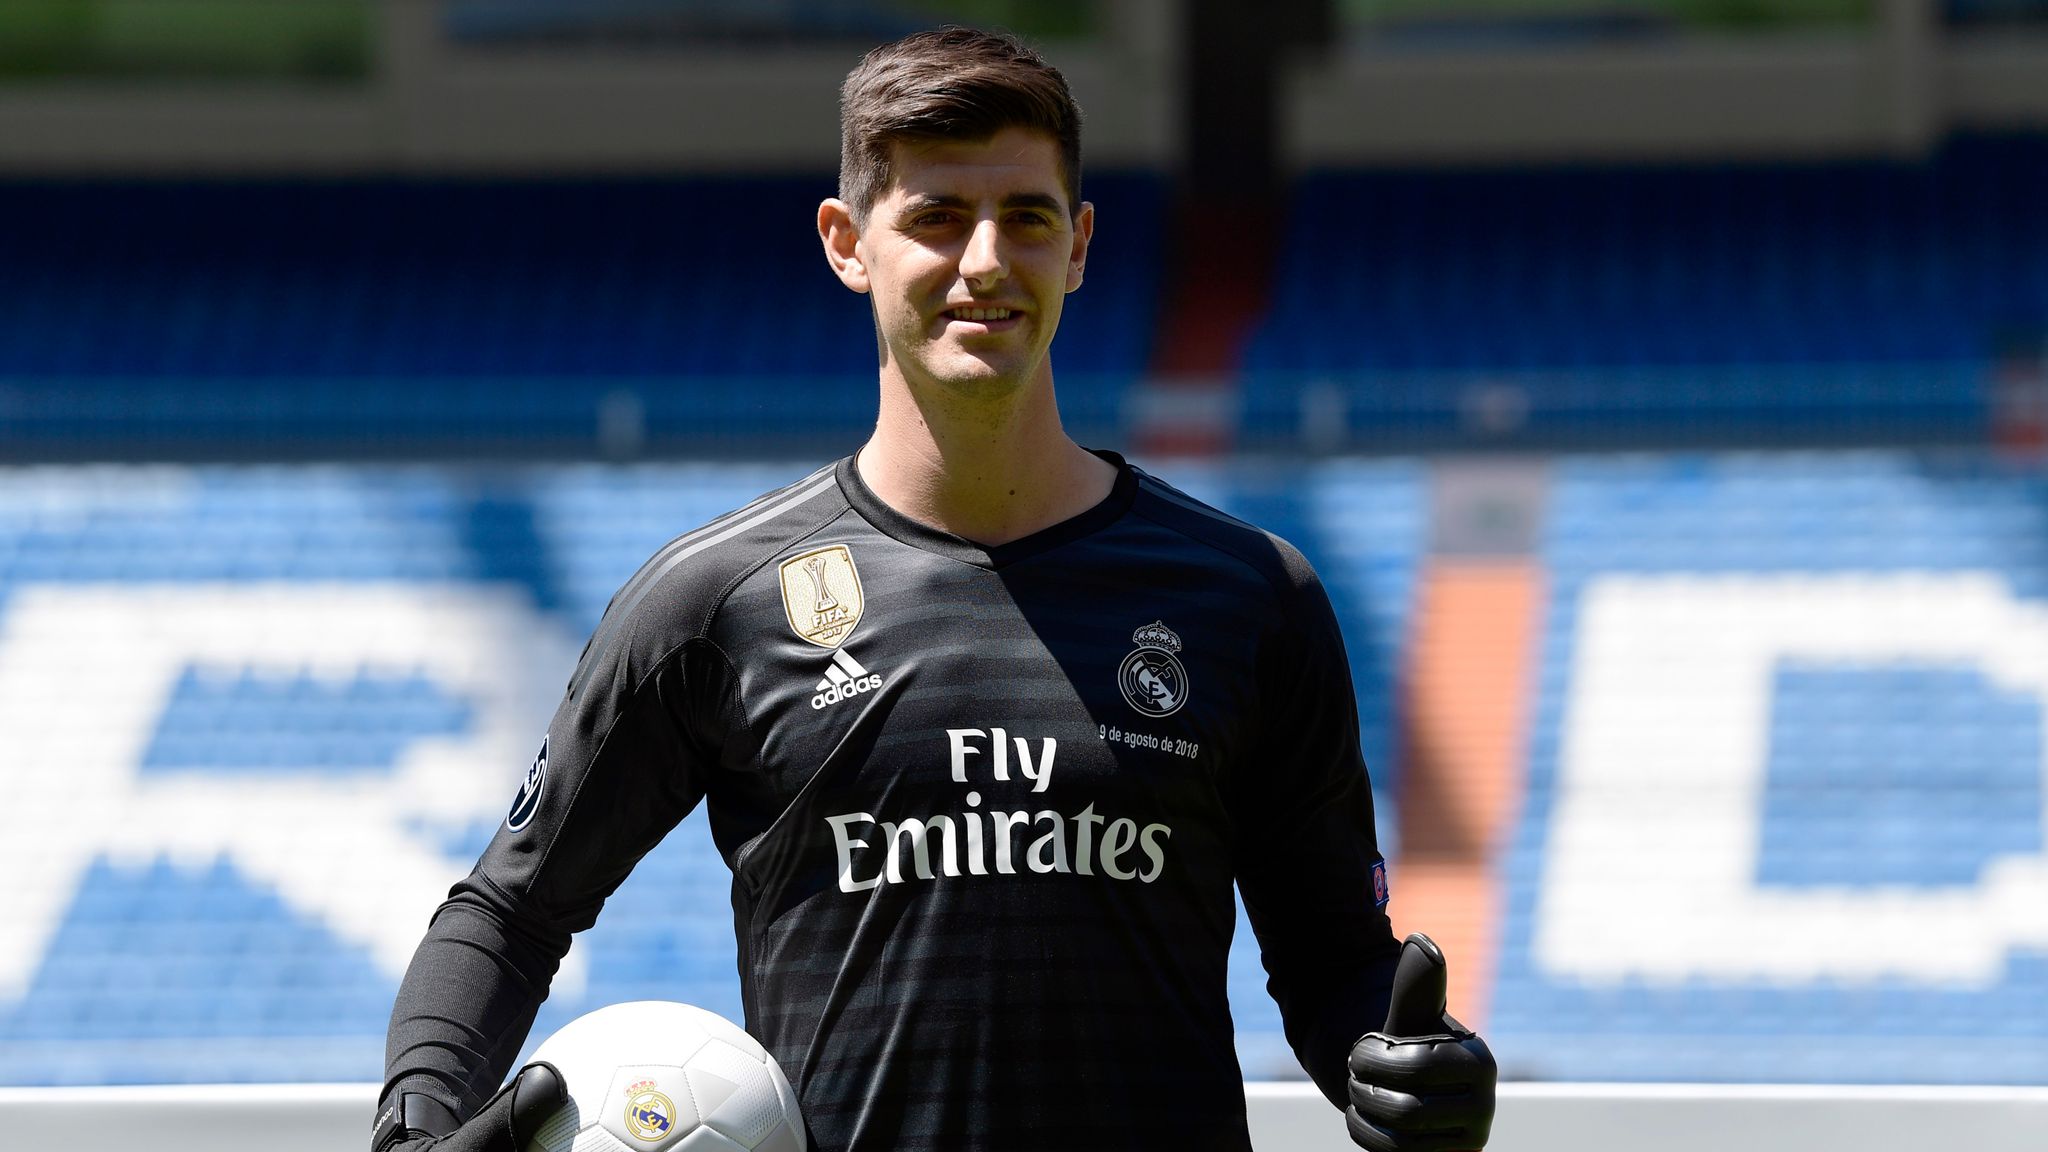 Thibaut Courtois left Chelsea for Real Madrid to be with family, says agent